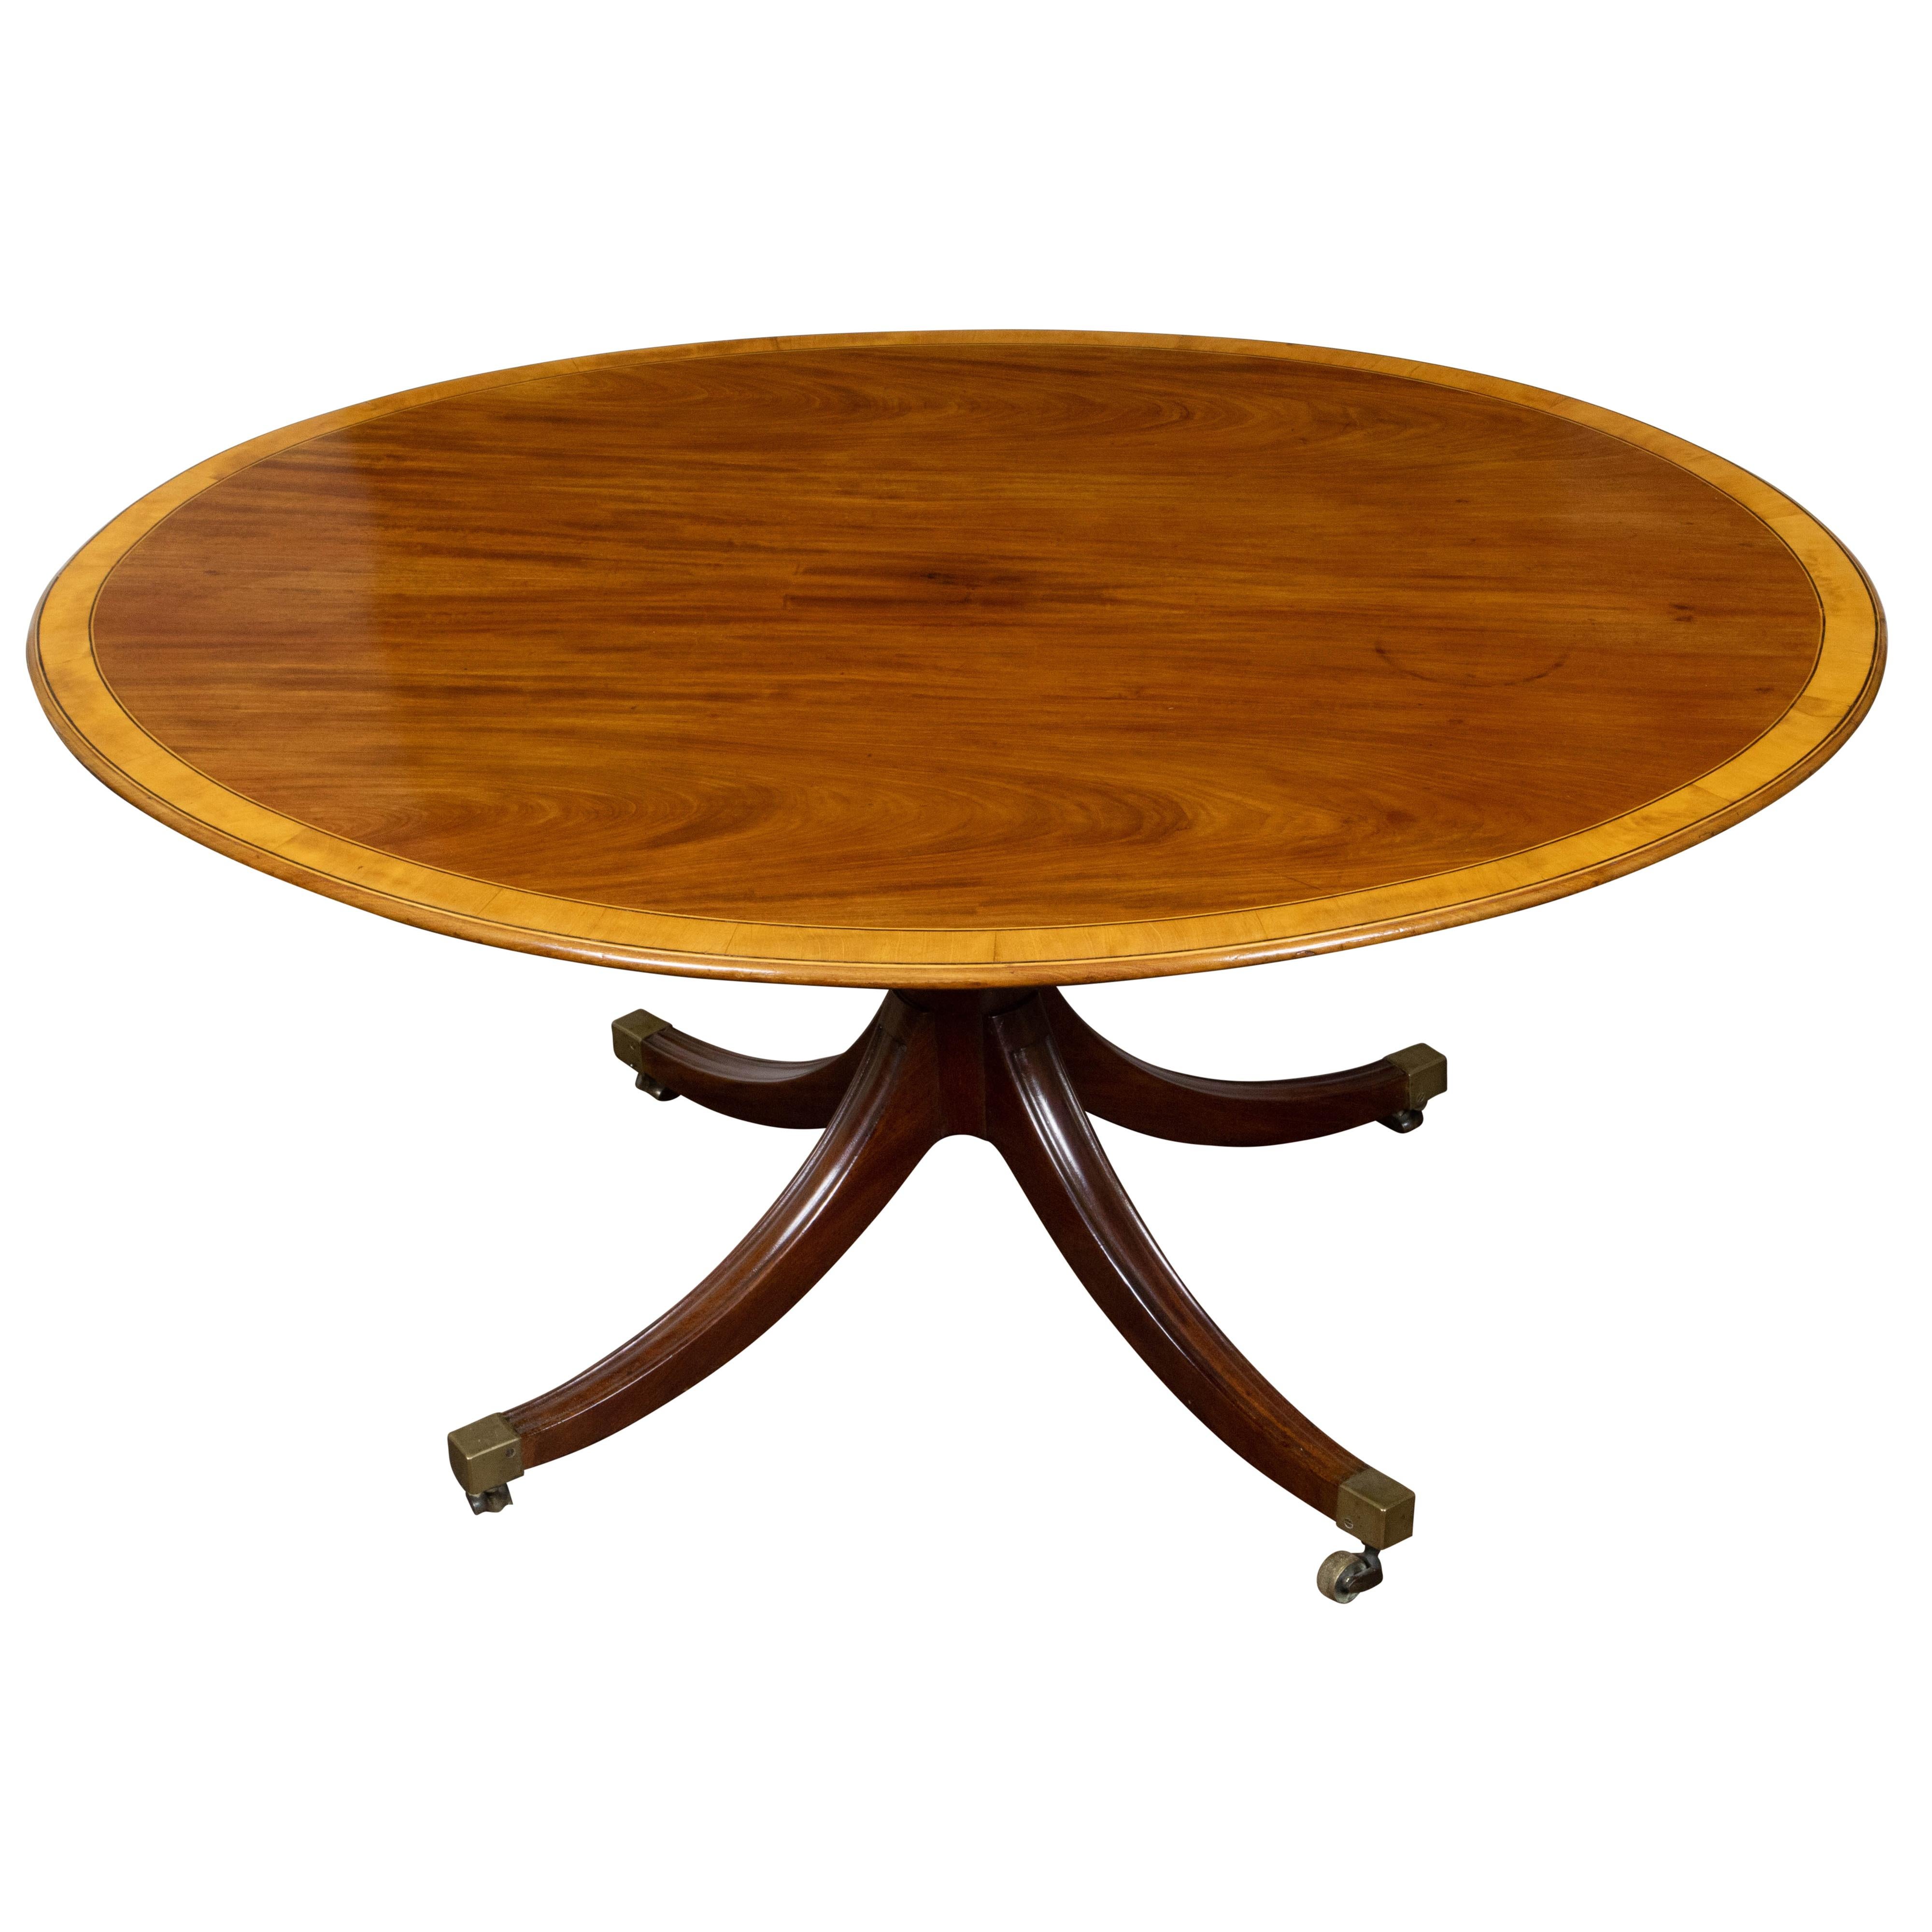 19th Century English Mahogany 1840s Oval Top Pedestal Table with Quadripod Base and Casters For Sale